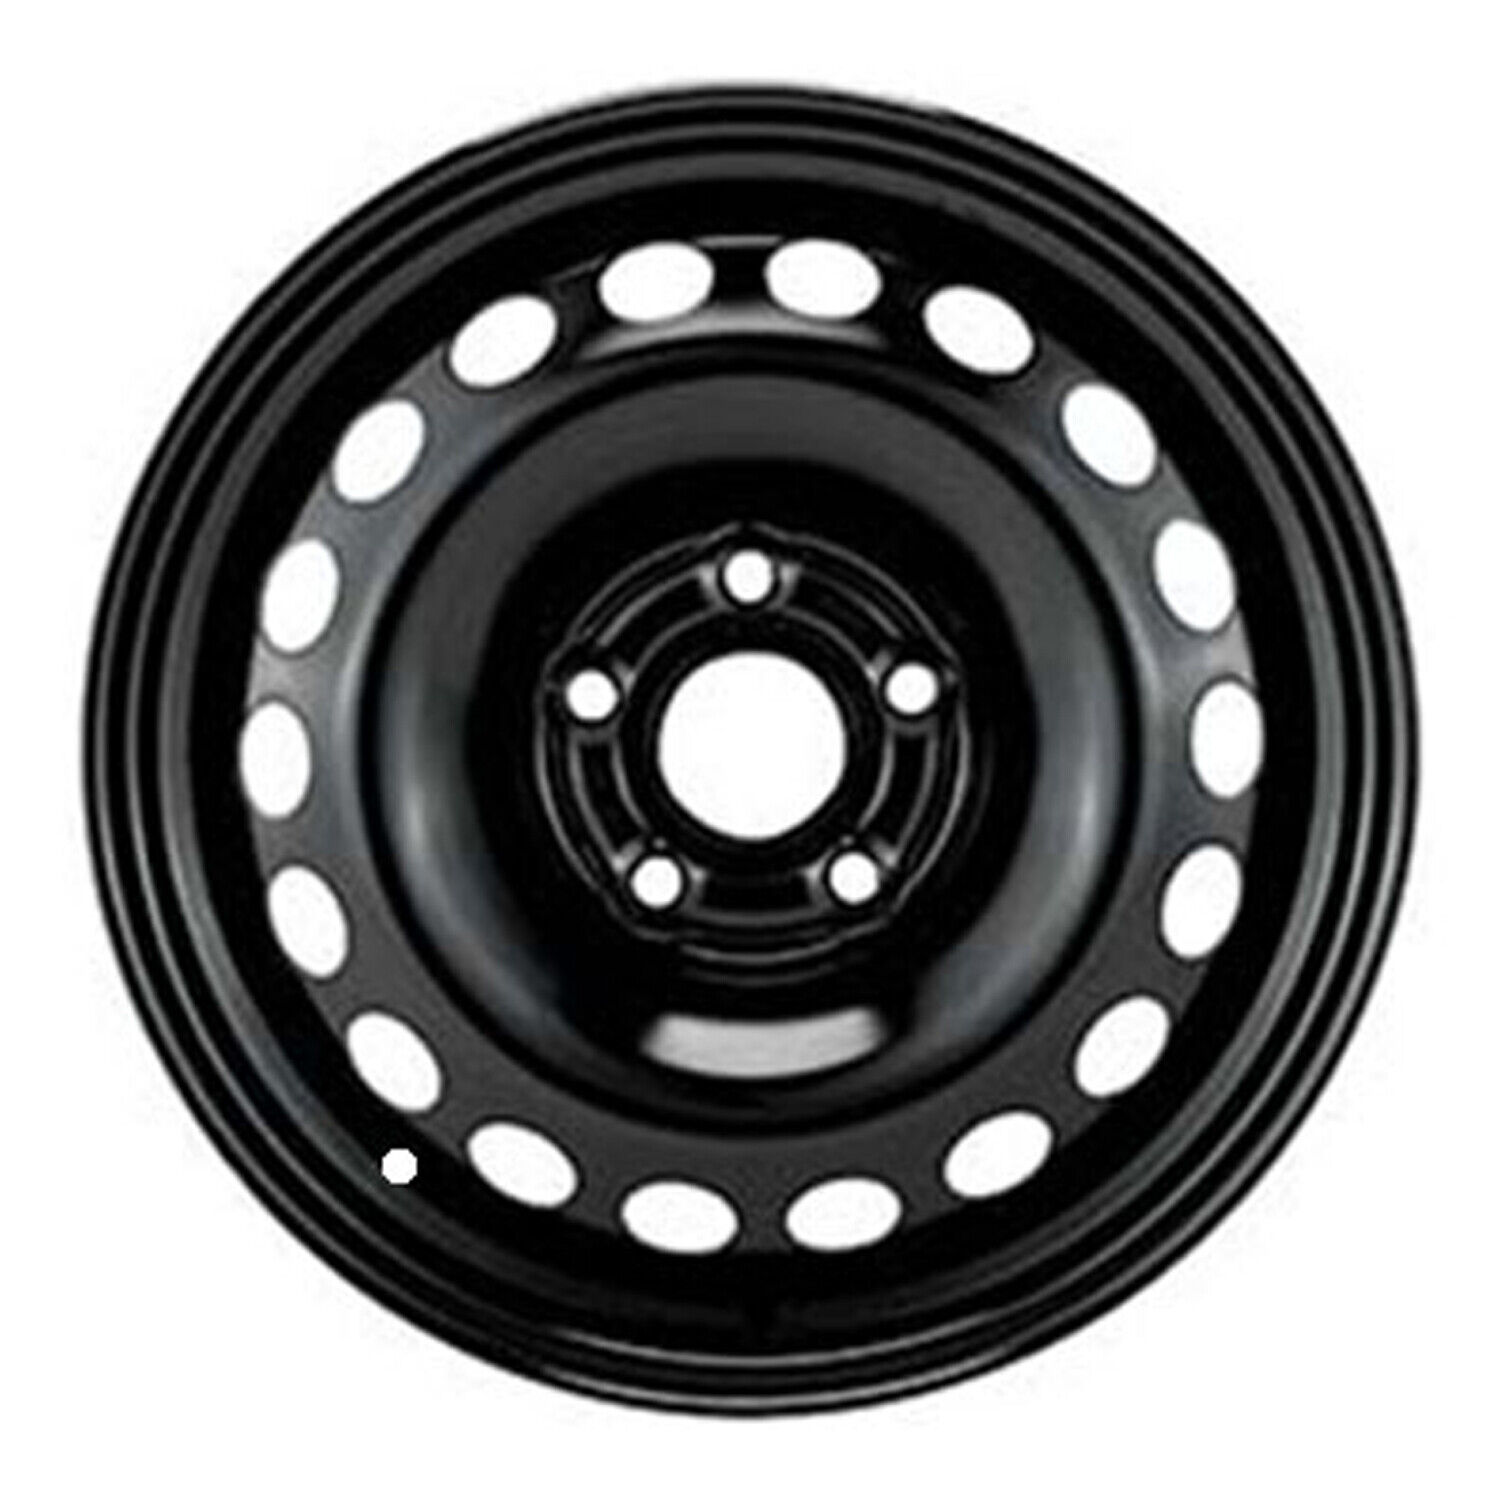 05524 Reconditioned Factory OEM Steel Wheel 15x6 Fits 2012-2016 Chevrolet Sonic